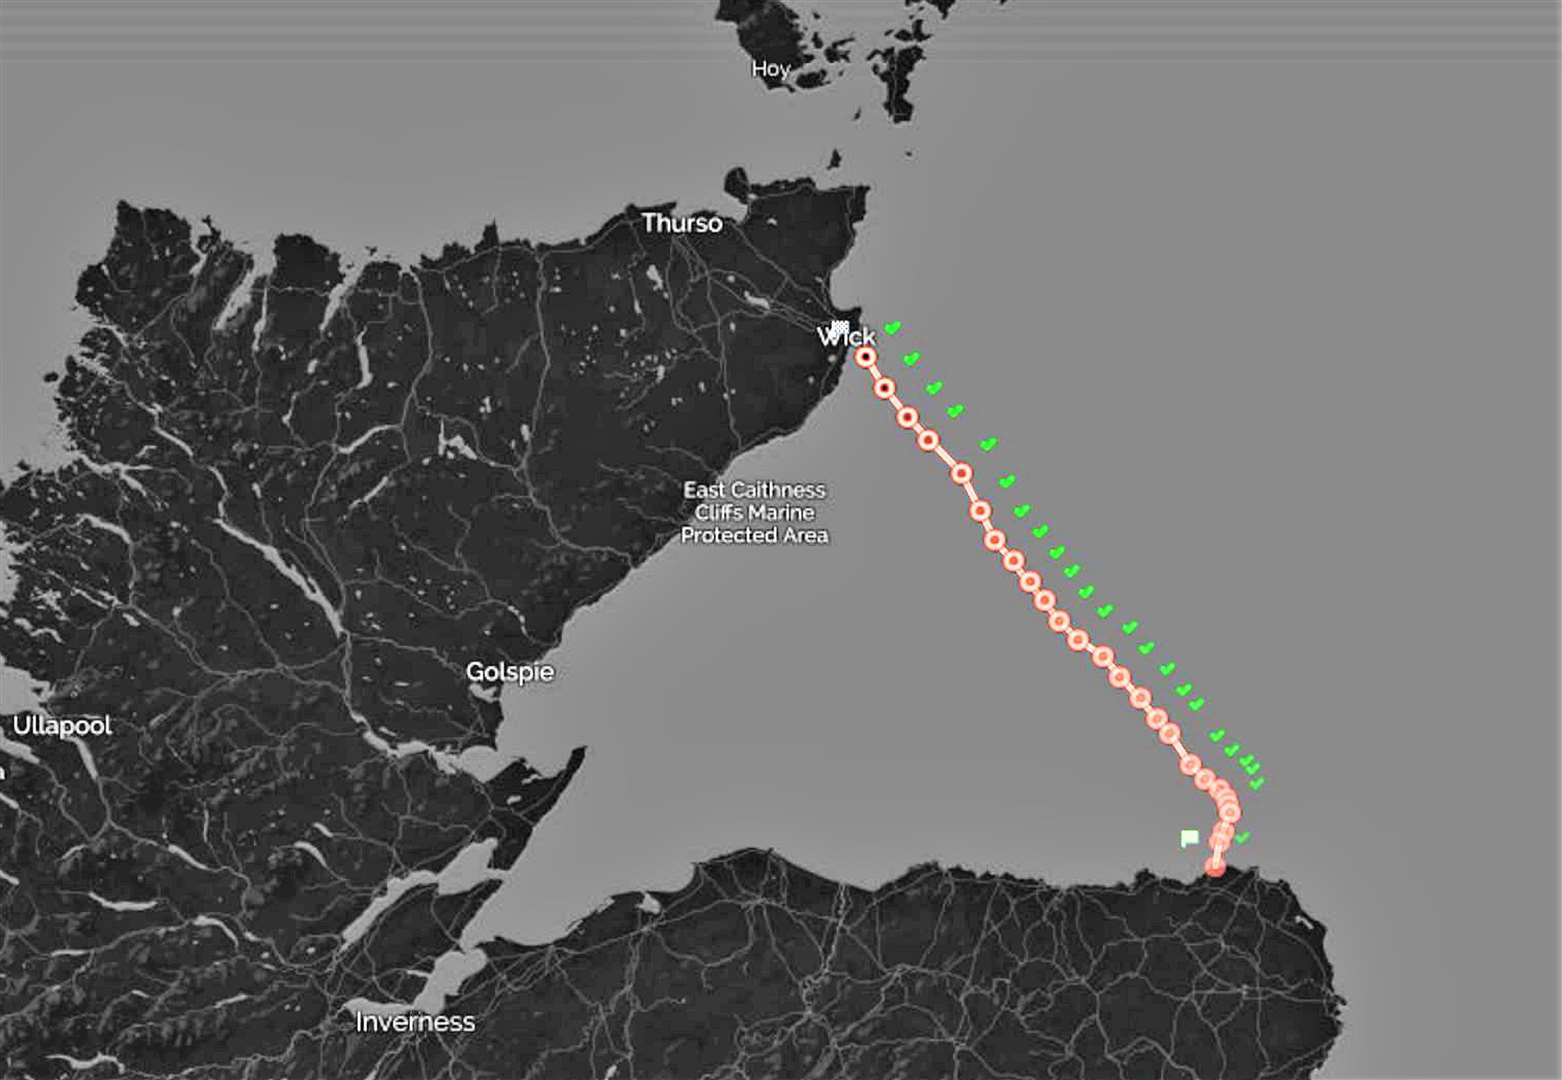 Charlie's journey across the Moray Firth plotted by a tracking device he carried.